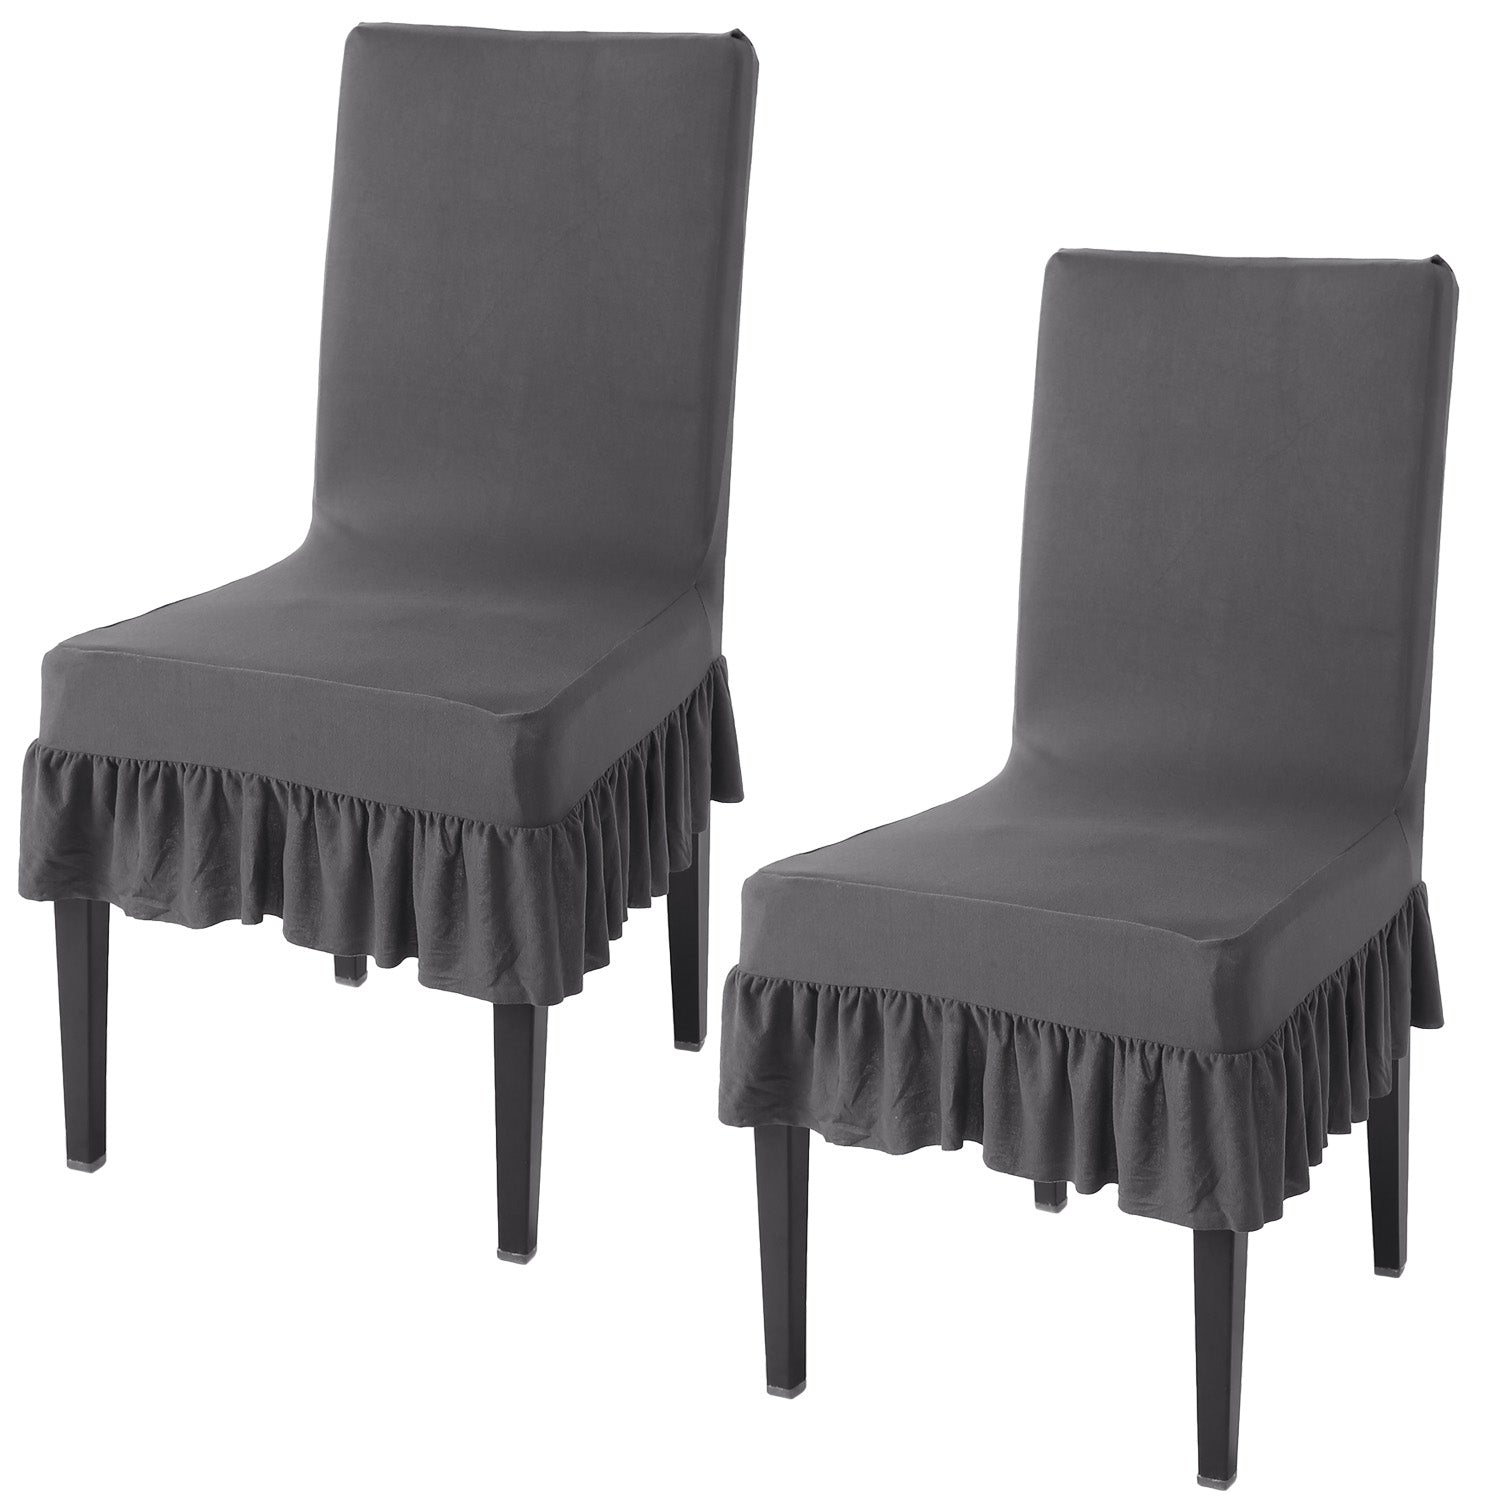 Elastic Stretchable Dining Chair Cover with Frill, Fossil Grey